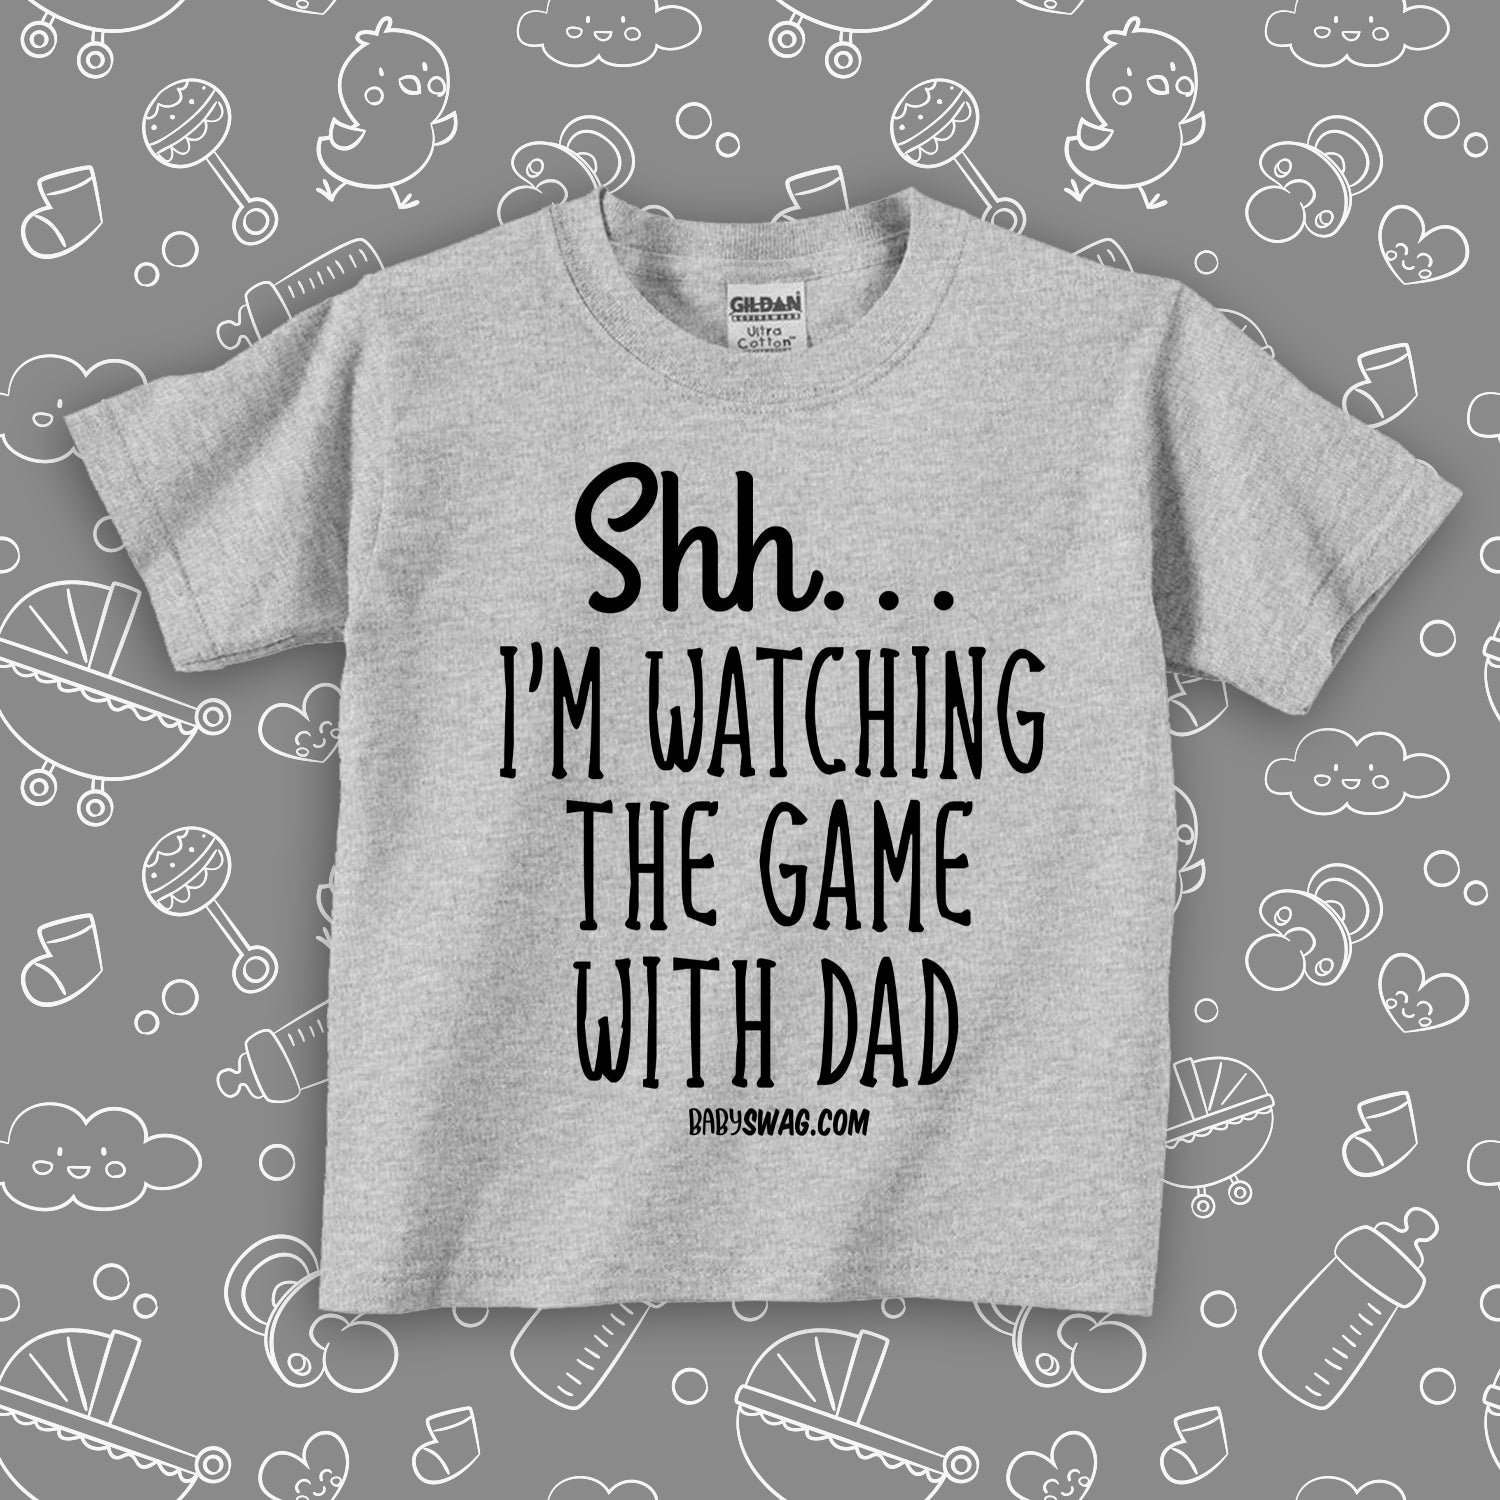 Toddler boy shirt with saying: "Shh.. I'm Watching The Game With Dad" in grey.